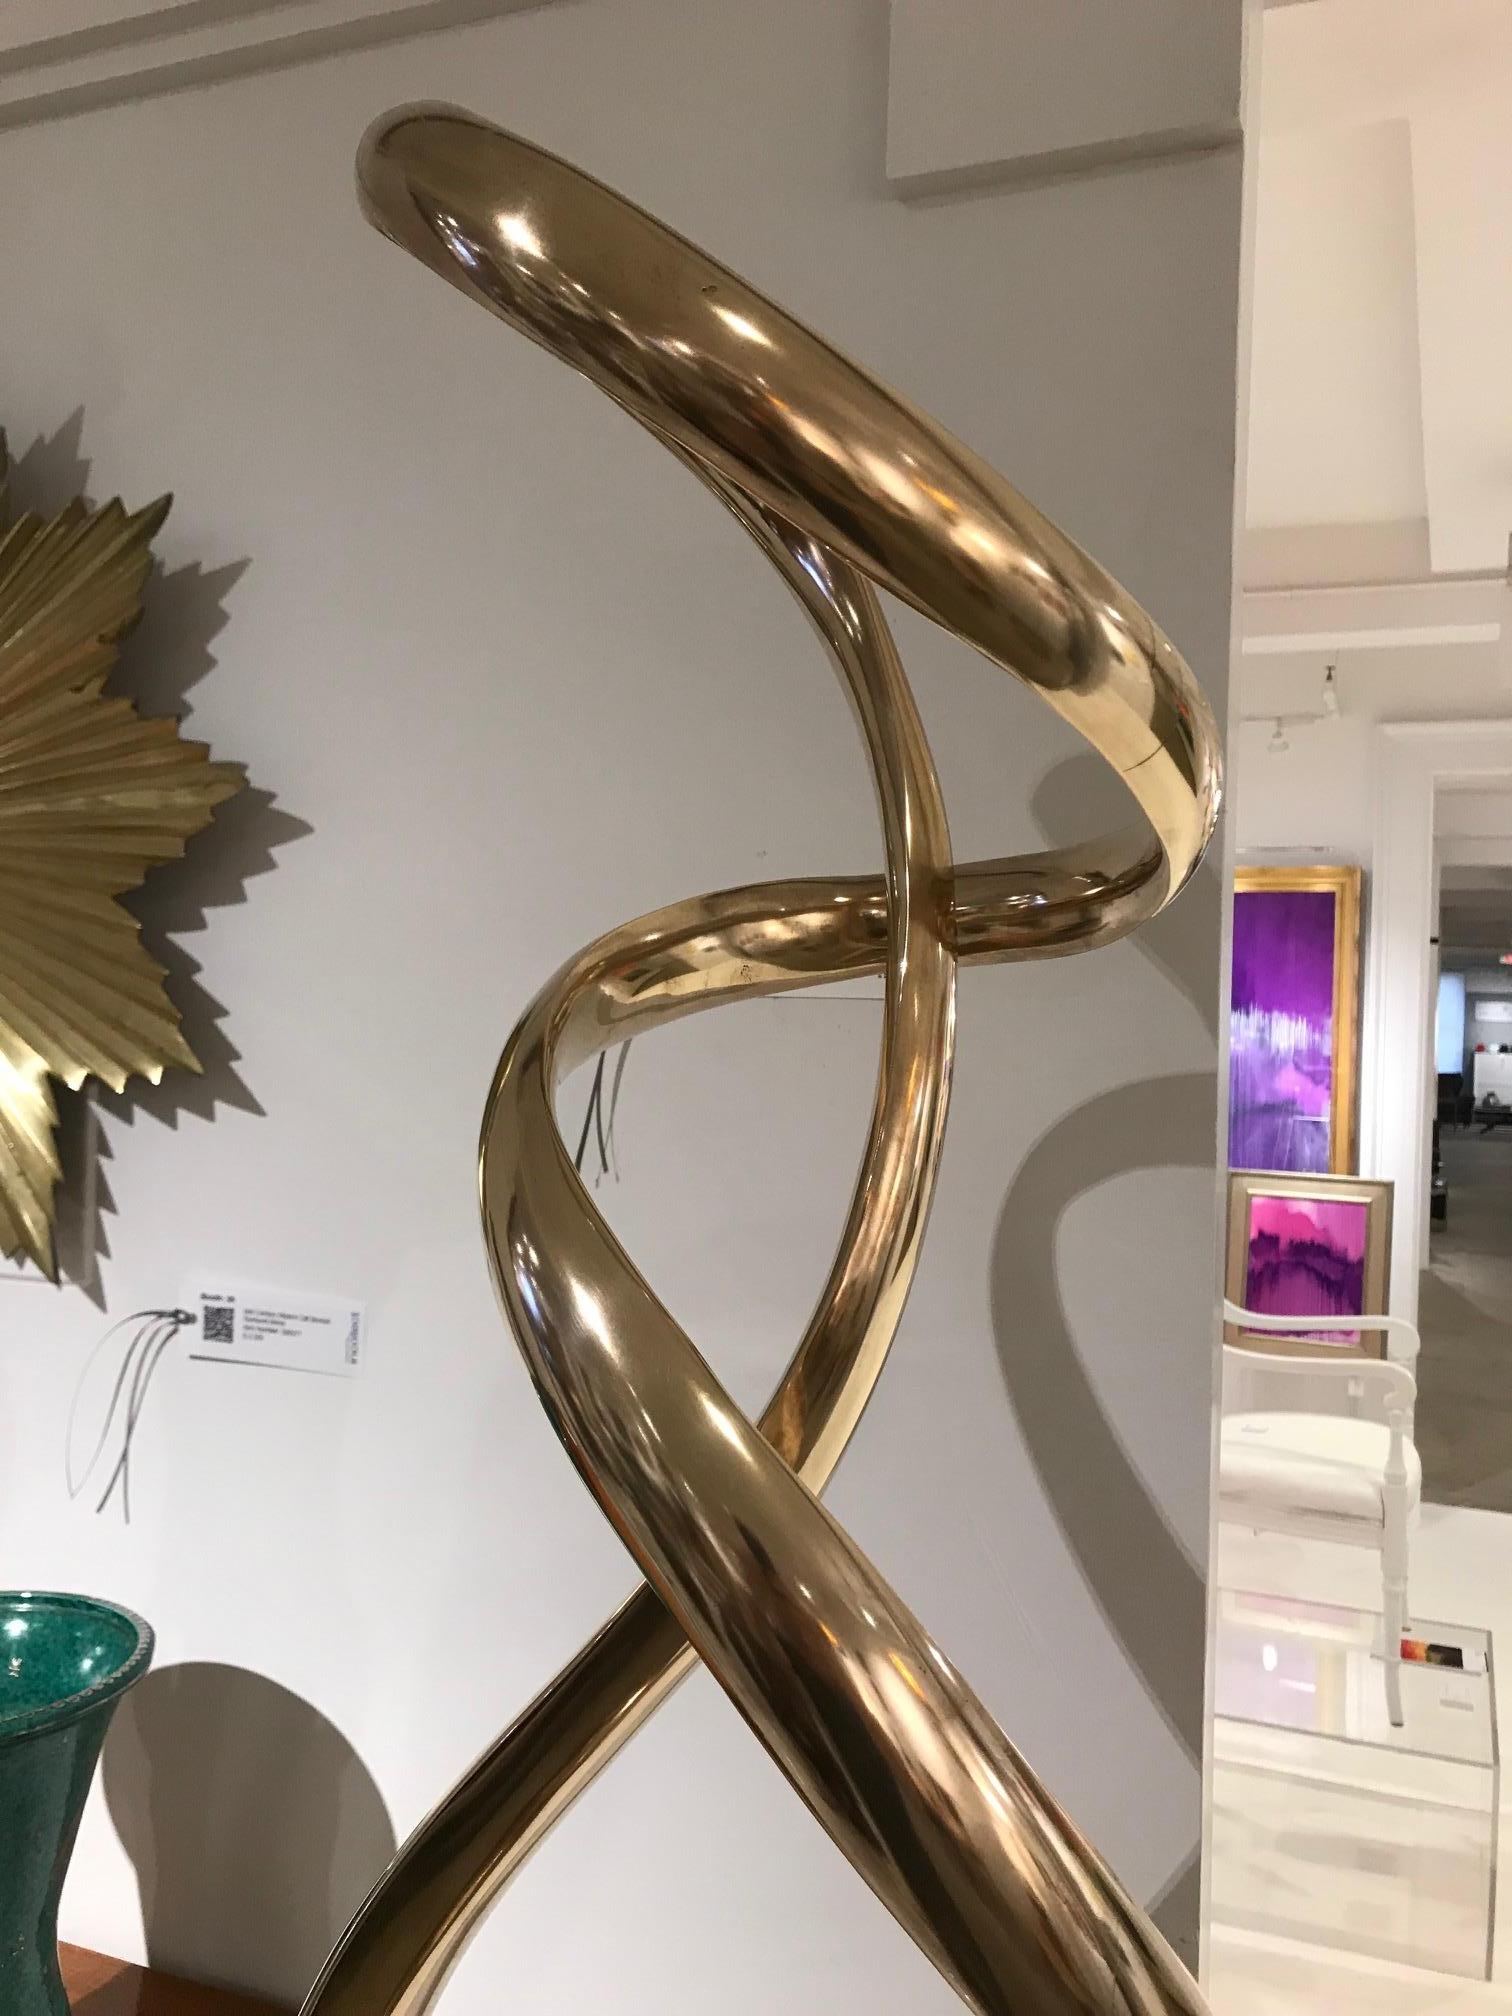 Tall Abstract Polished Bronze Sculpture by Kieff 2